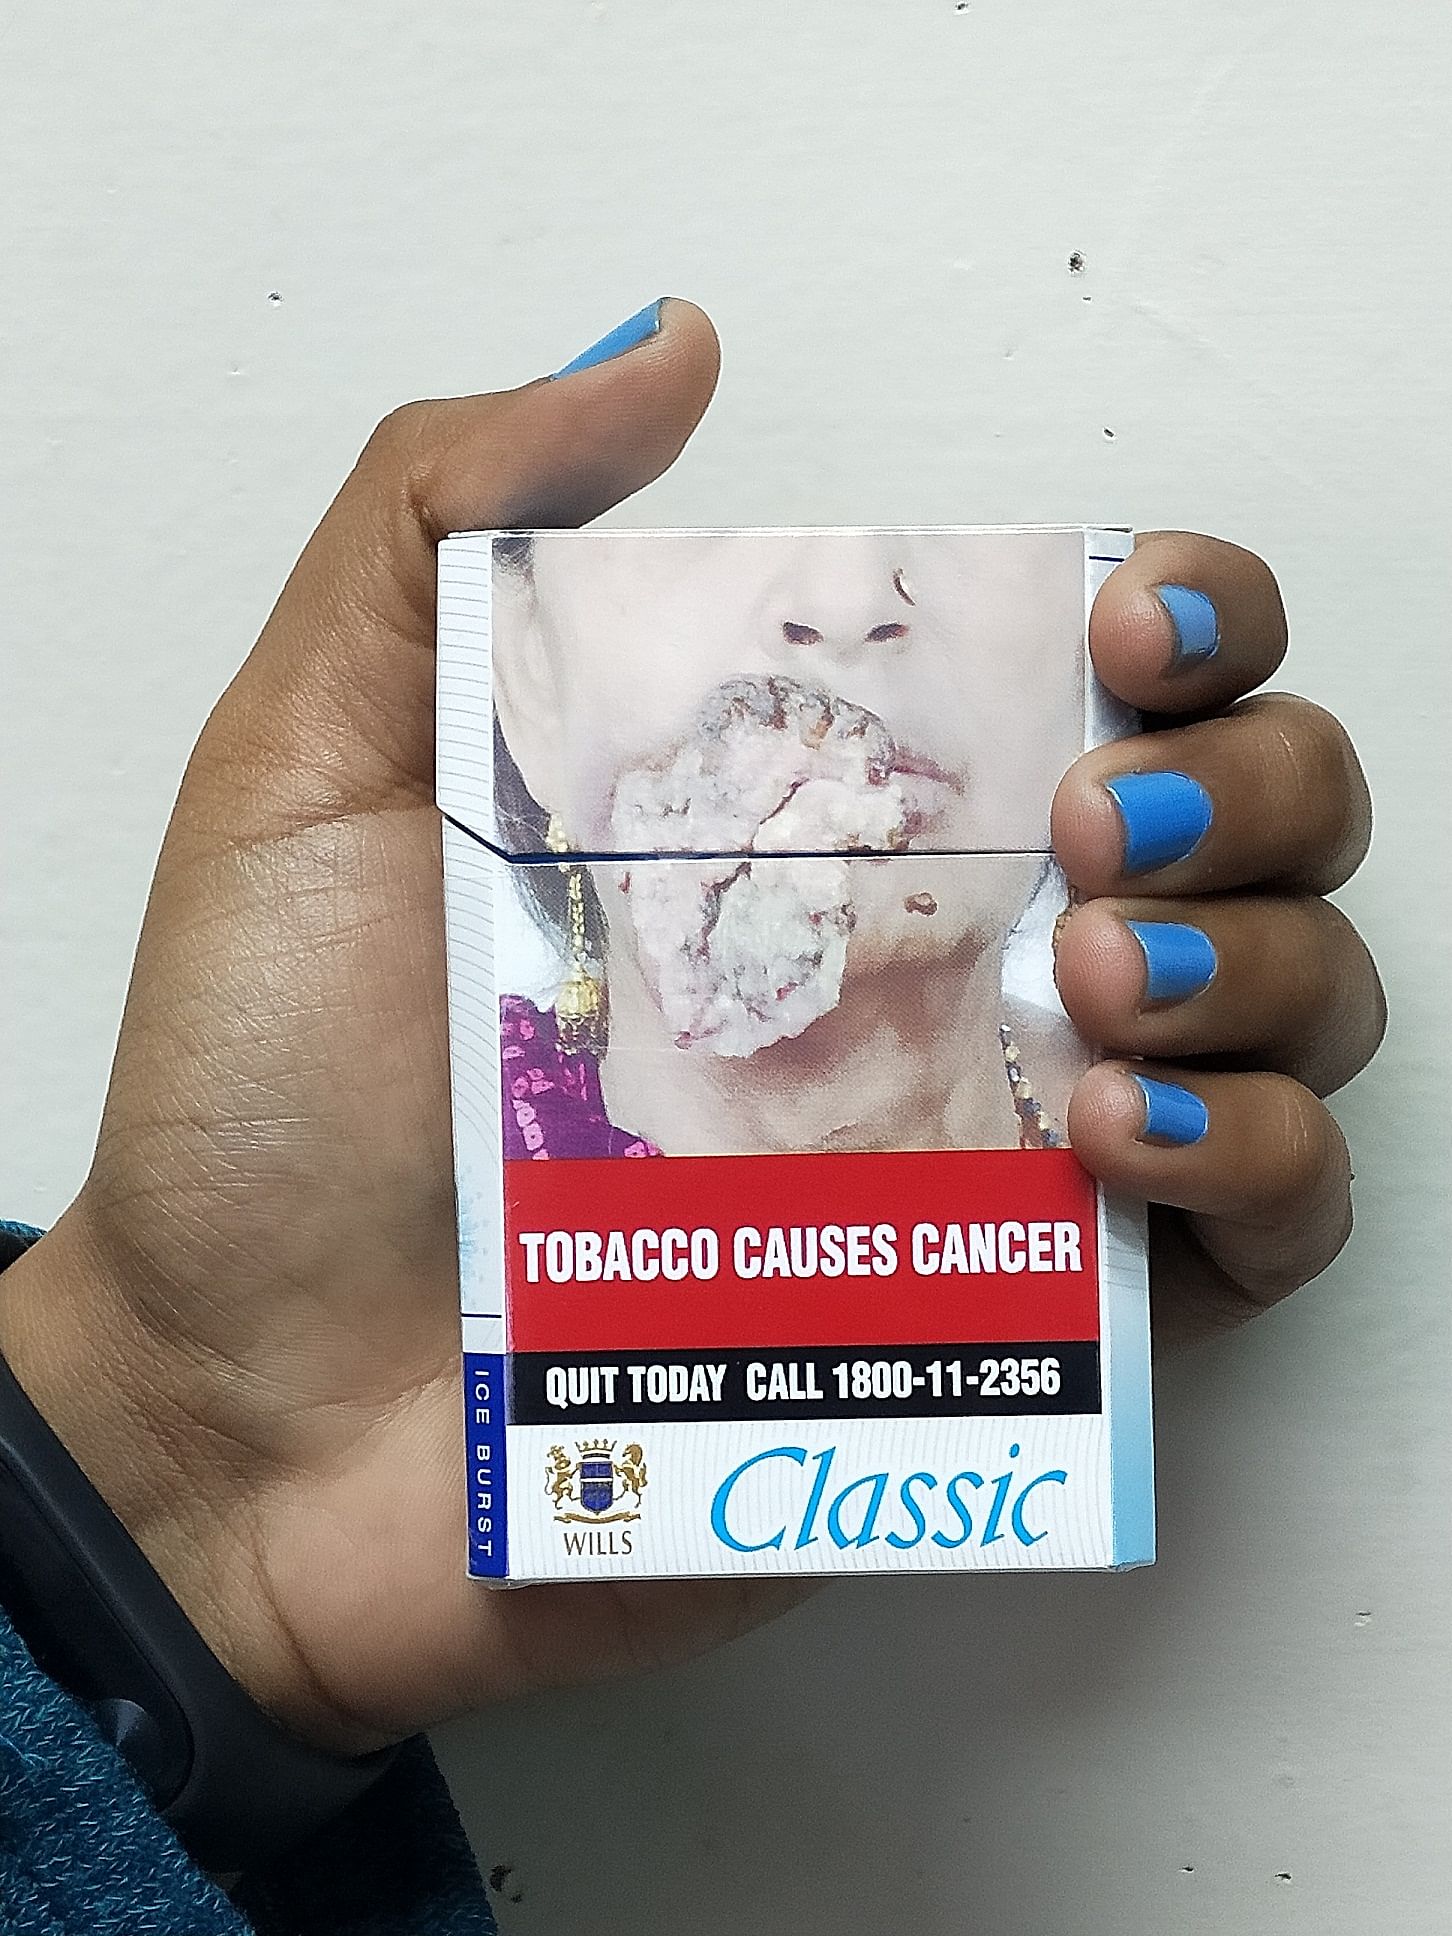 It is mandatory to print the tobacco helpline number prominently on cigarette and smokeless tobacco packs.